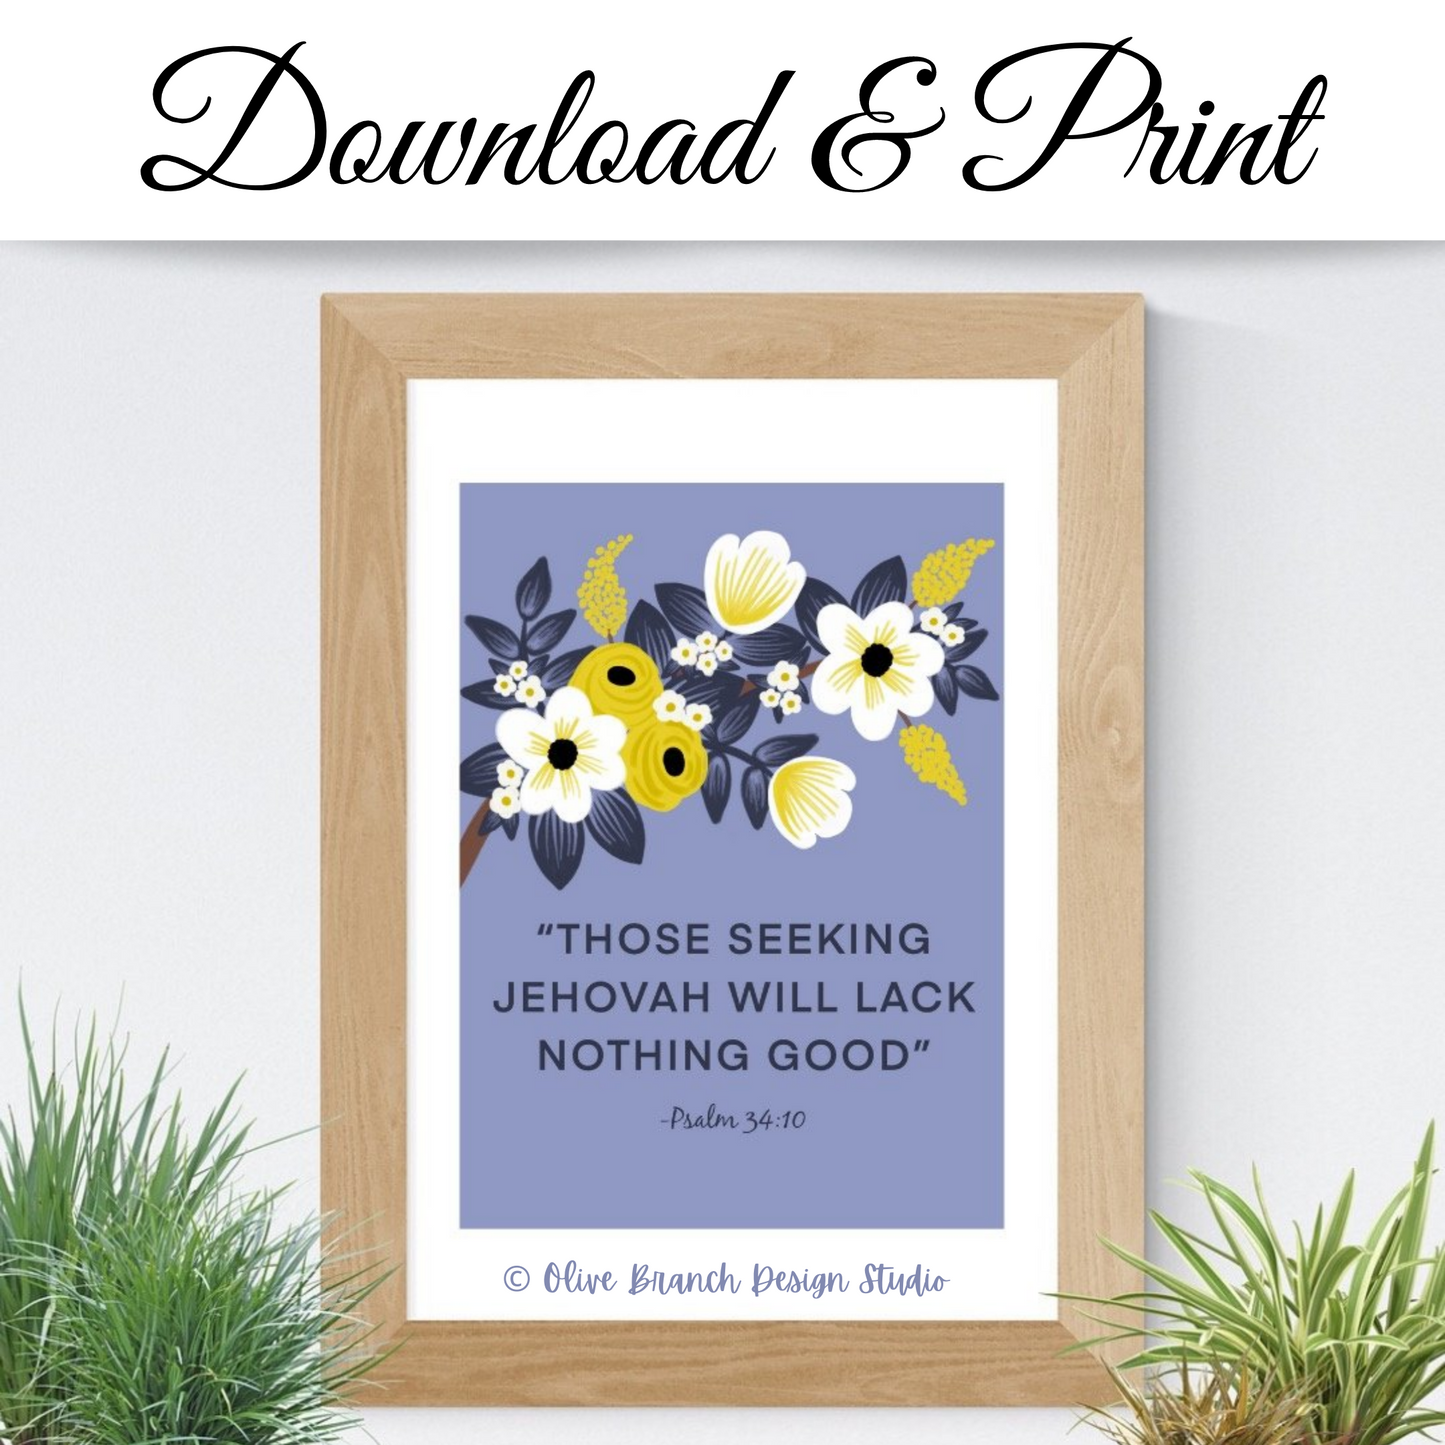 Those Seeking Jehovah Will Lack Nothing Good -Psalm 34:10 Print